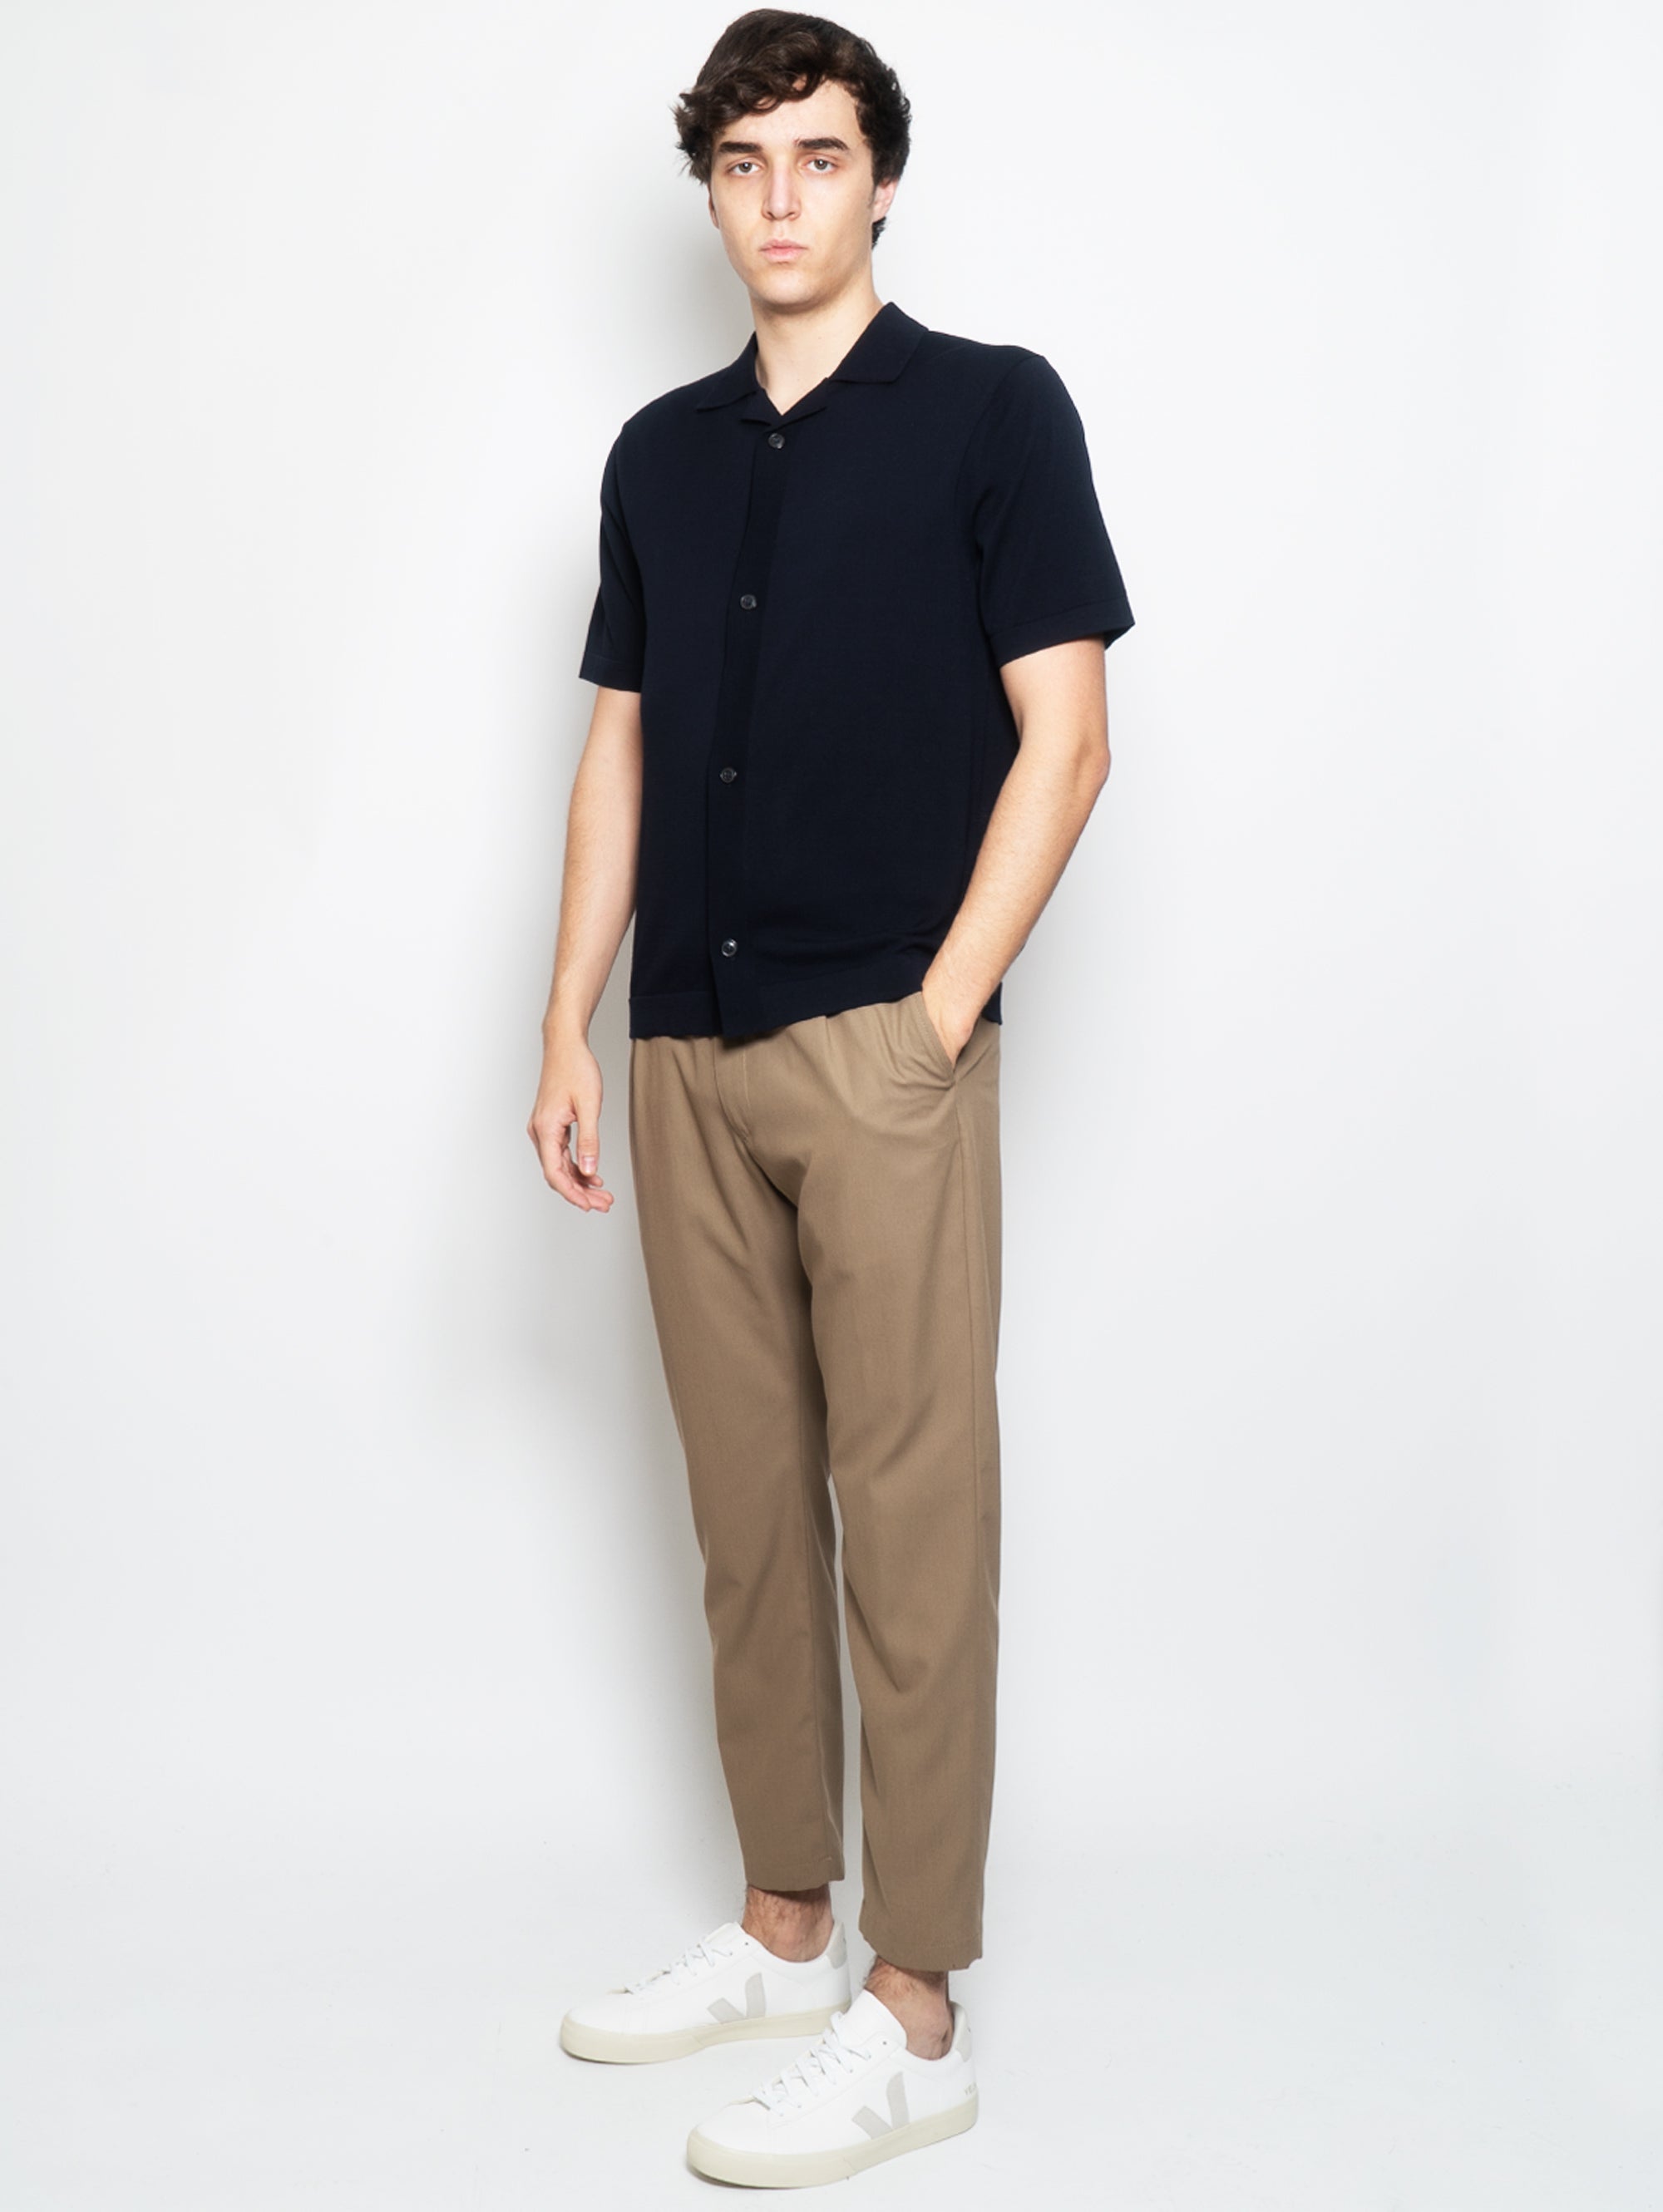 Beige Trousers with Pleats and Elastic Waist